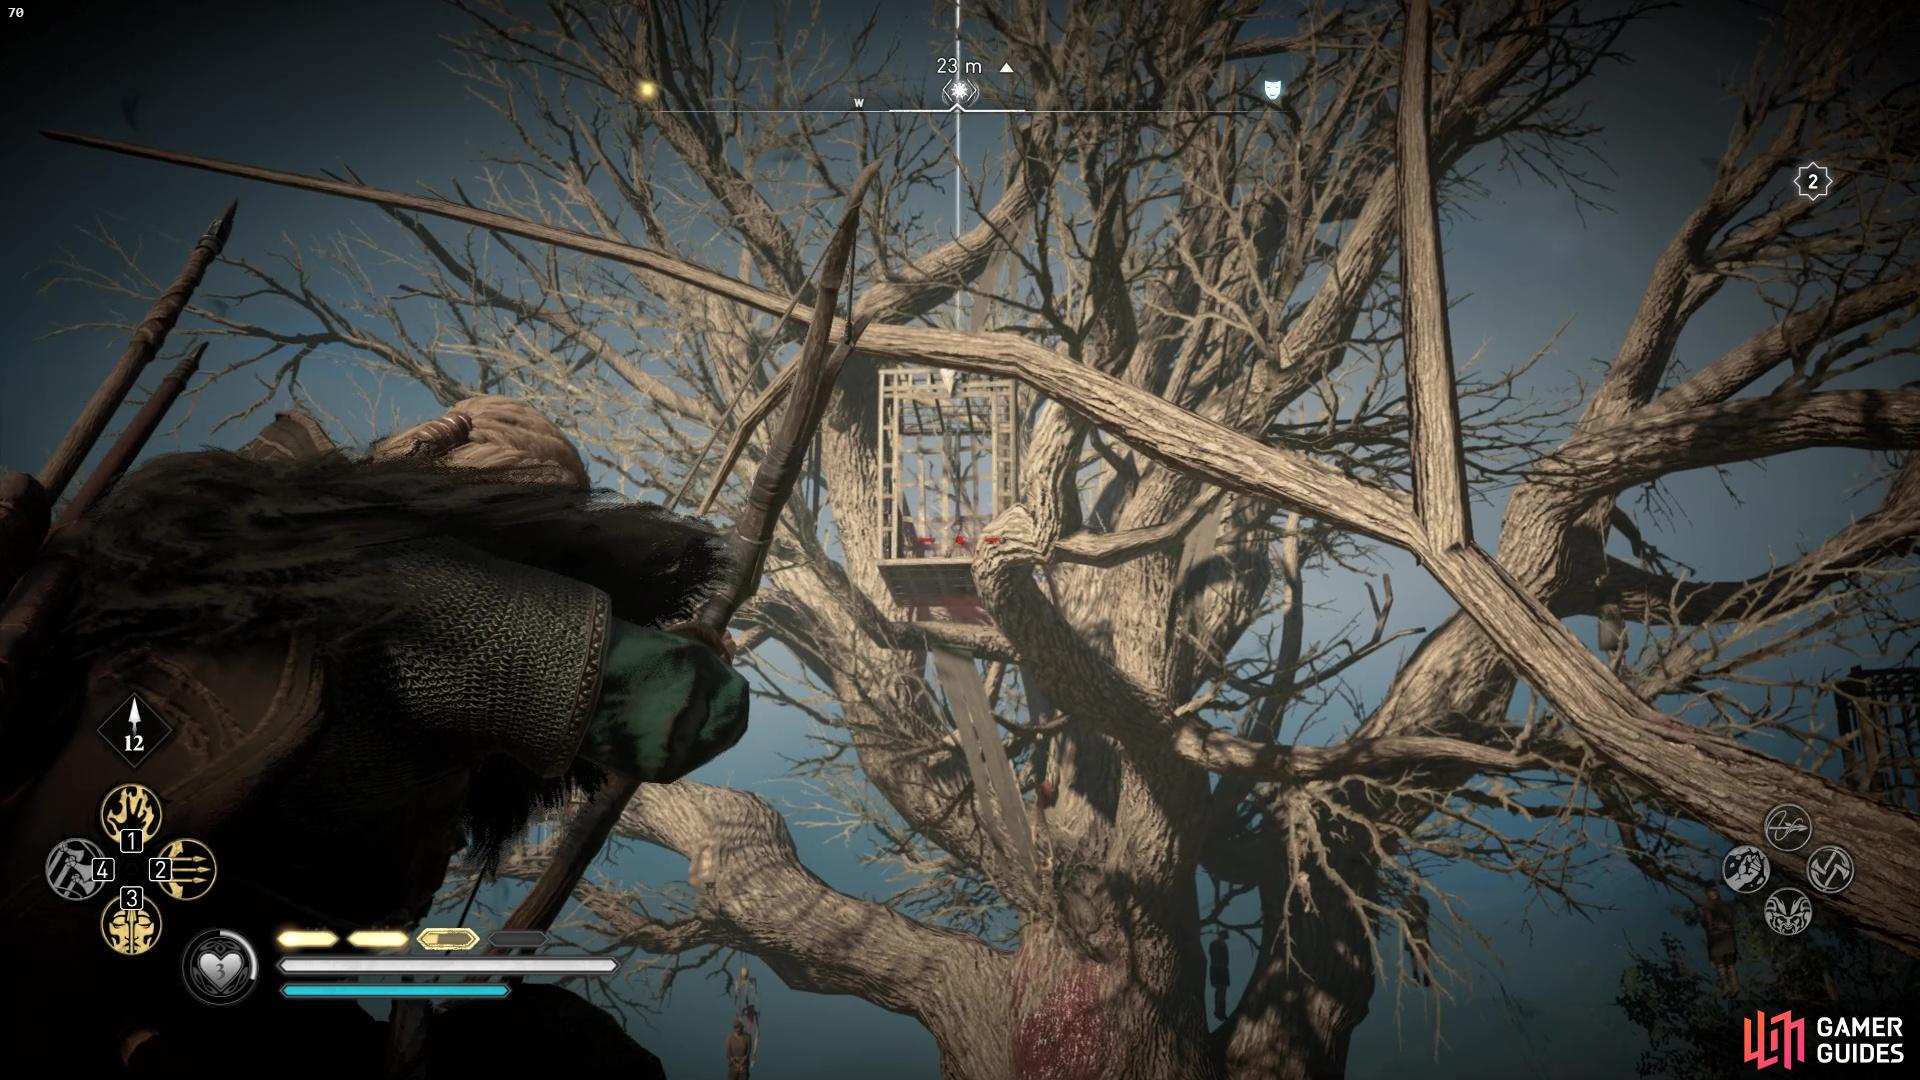 When you're at the end of the line of trees, use your bow to shoot down the cursed symbol.